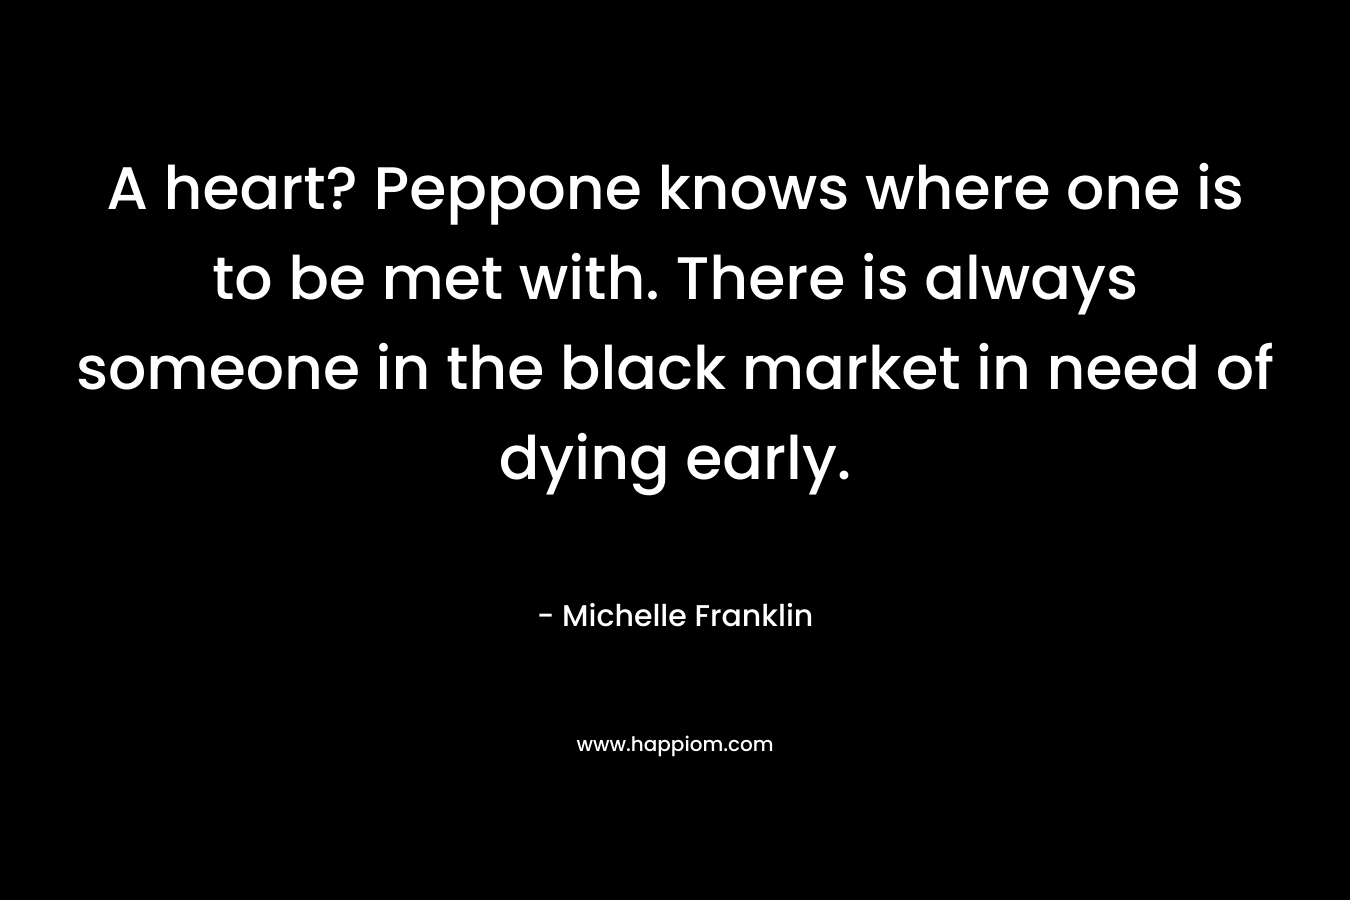 A heart? Peppone knows where one is to be met with. There is always someone in the black market in need of dying early. – Michelle Franklin